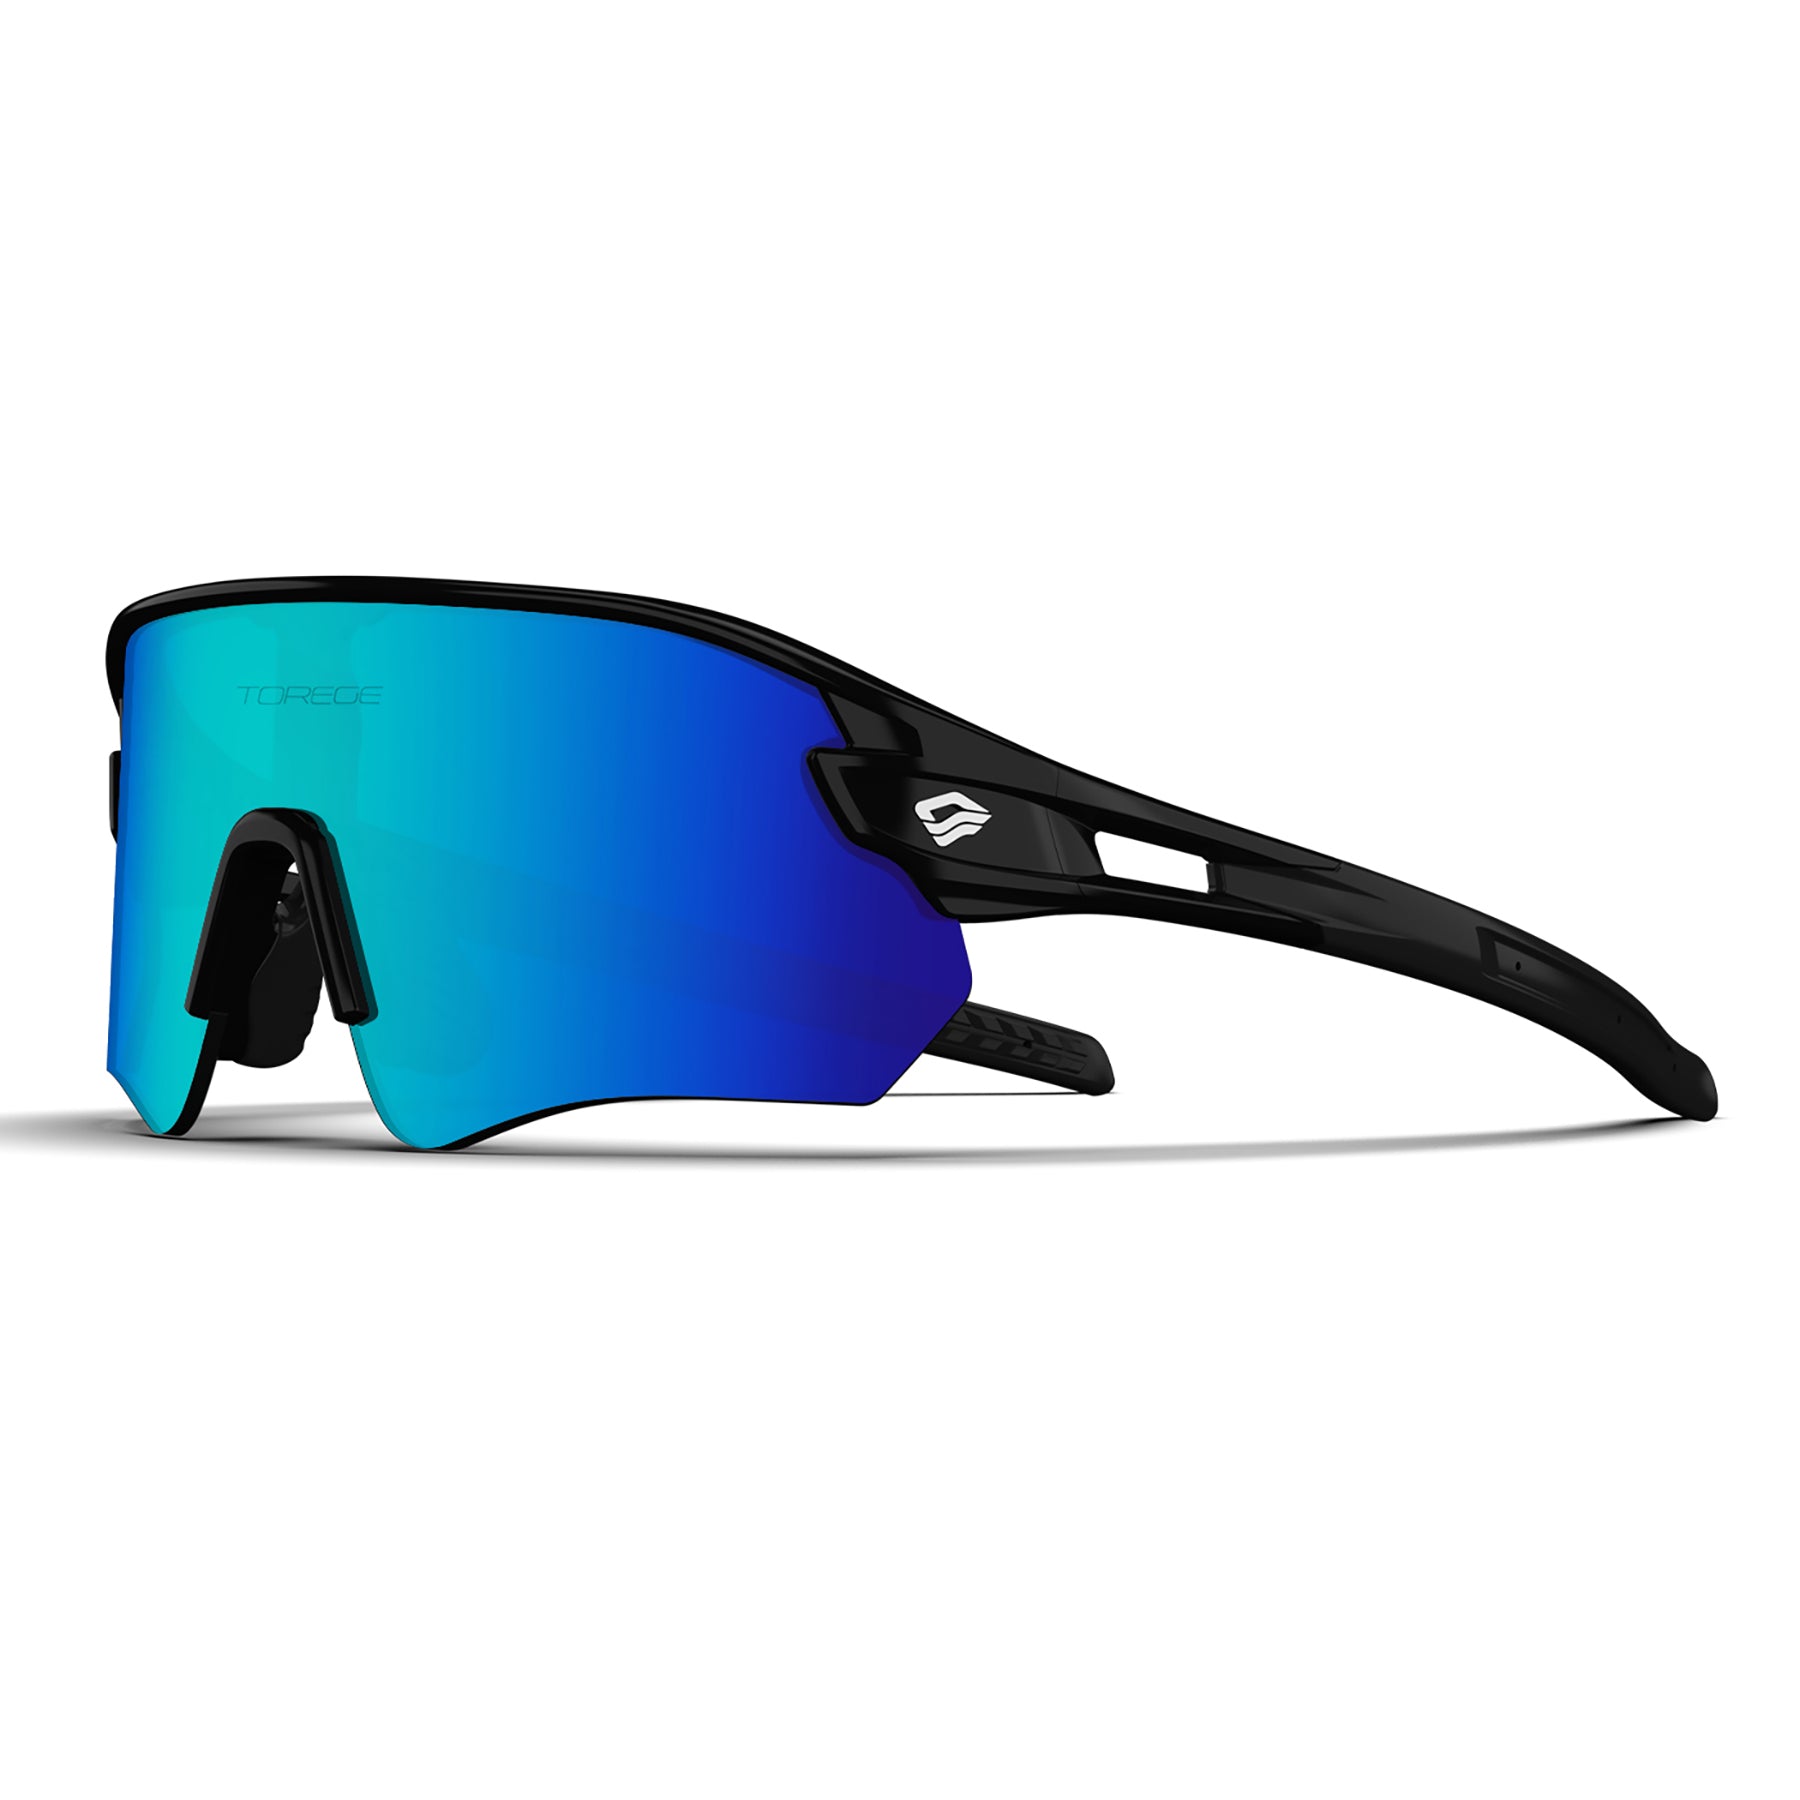 Laser Drive Ultra Lightweight Sports Sunglasses for Men & Women with Lifetime Warranty - Ideal for Cycling, Hiking, Fishing, Golf & Running - Black